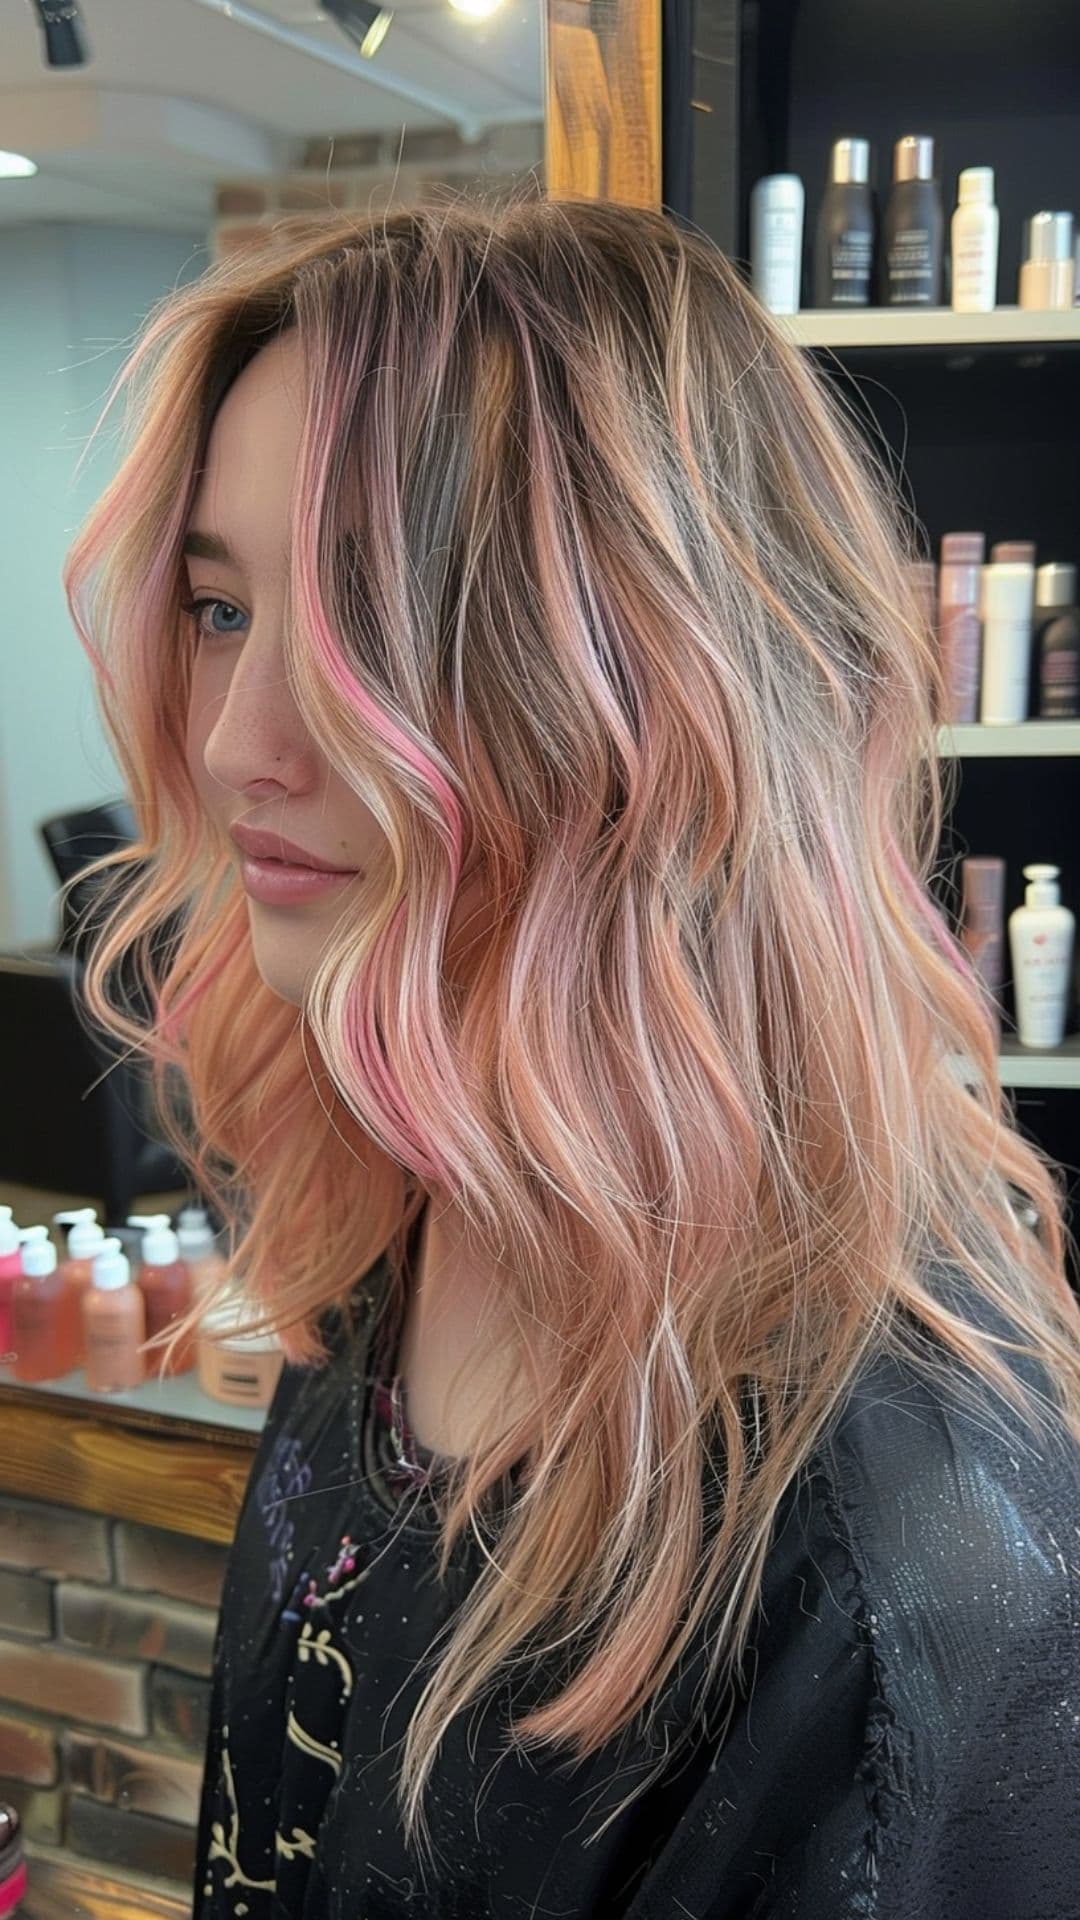 A woman modelling a strawberry pink highlights hair.